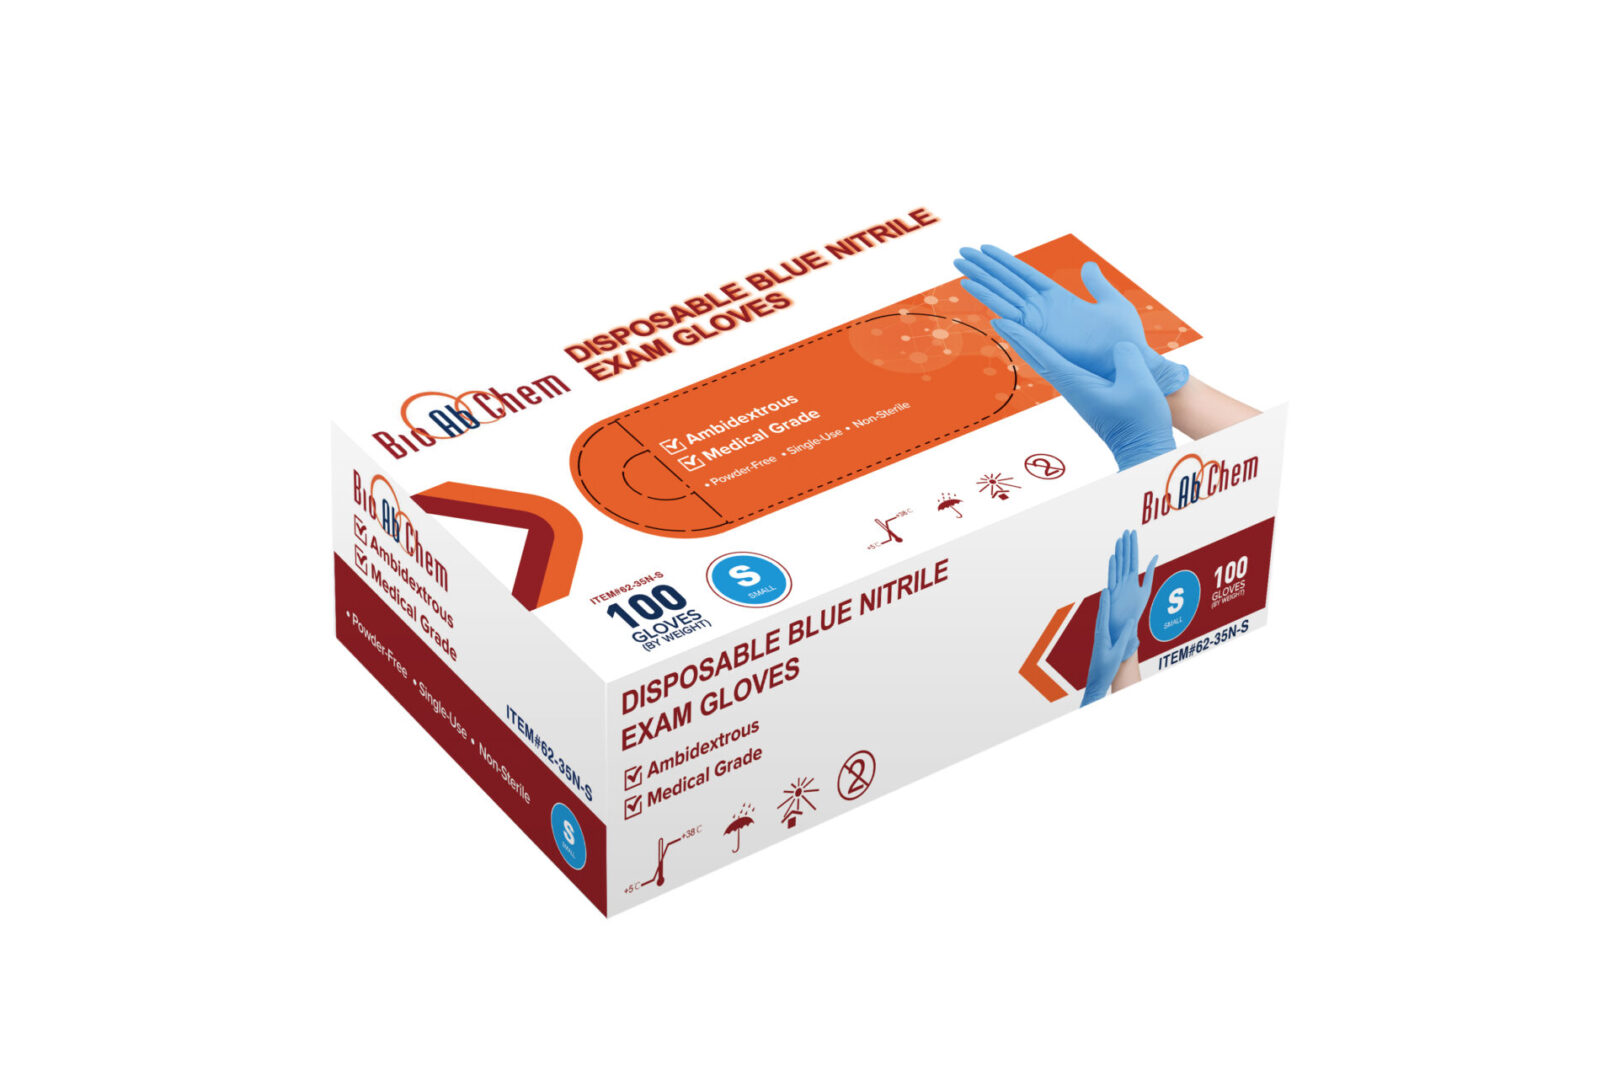 A box of blue nitrile exam gloves.